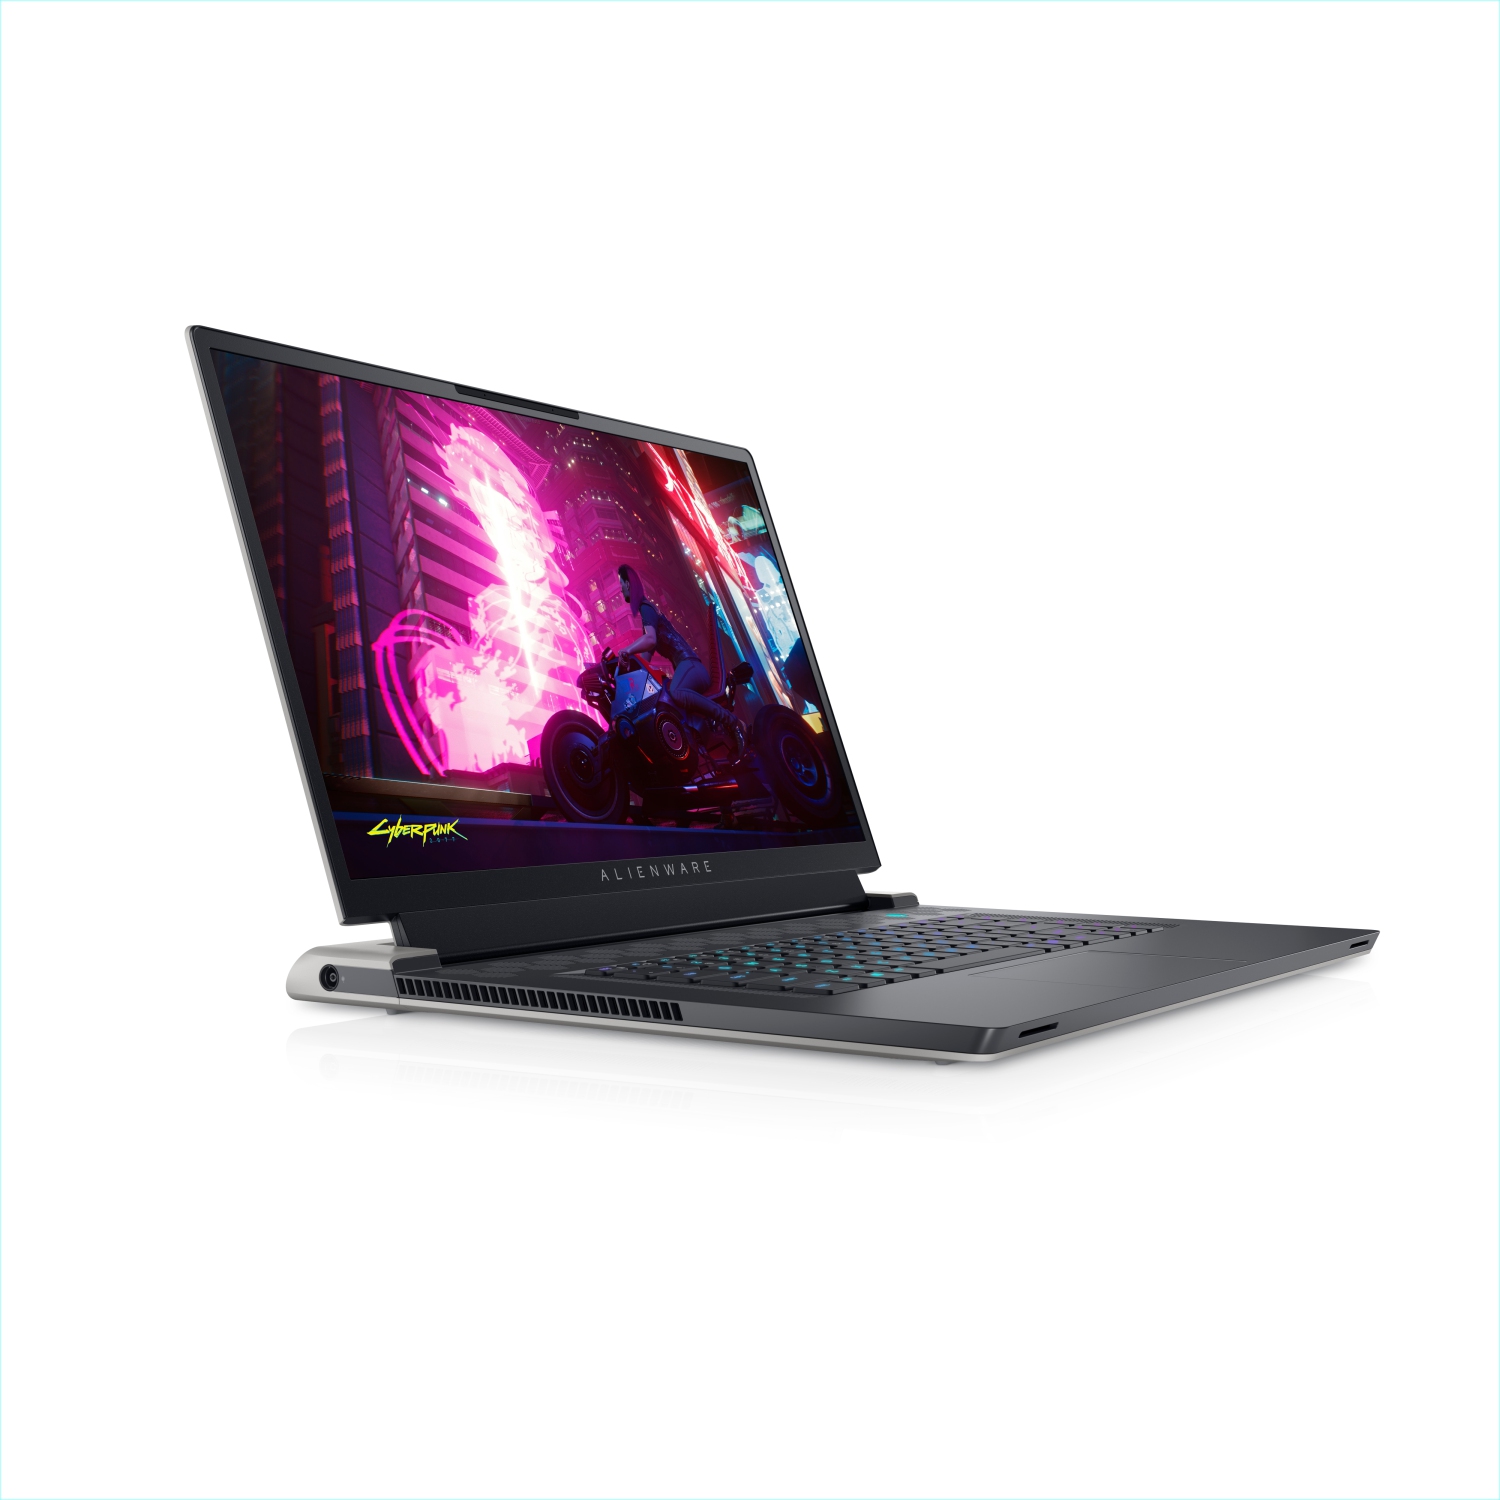 Refurbished (Excellent) - Dell Alienware X17 R1 Gaming Laptop (2021), 17.3" FHD, Core i7, 2TB SSD, 64GB RAM, RTX 3060, 8 Cores @ 4.6 GHz, 11th Gen CPU Certified